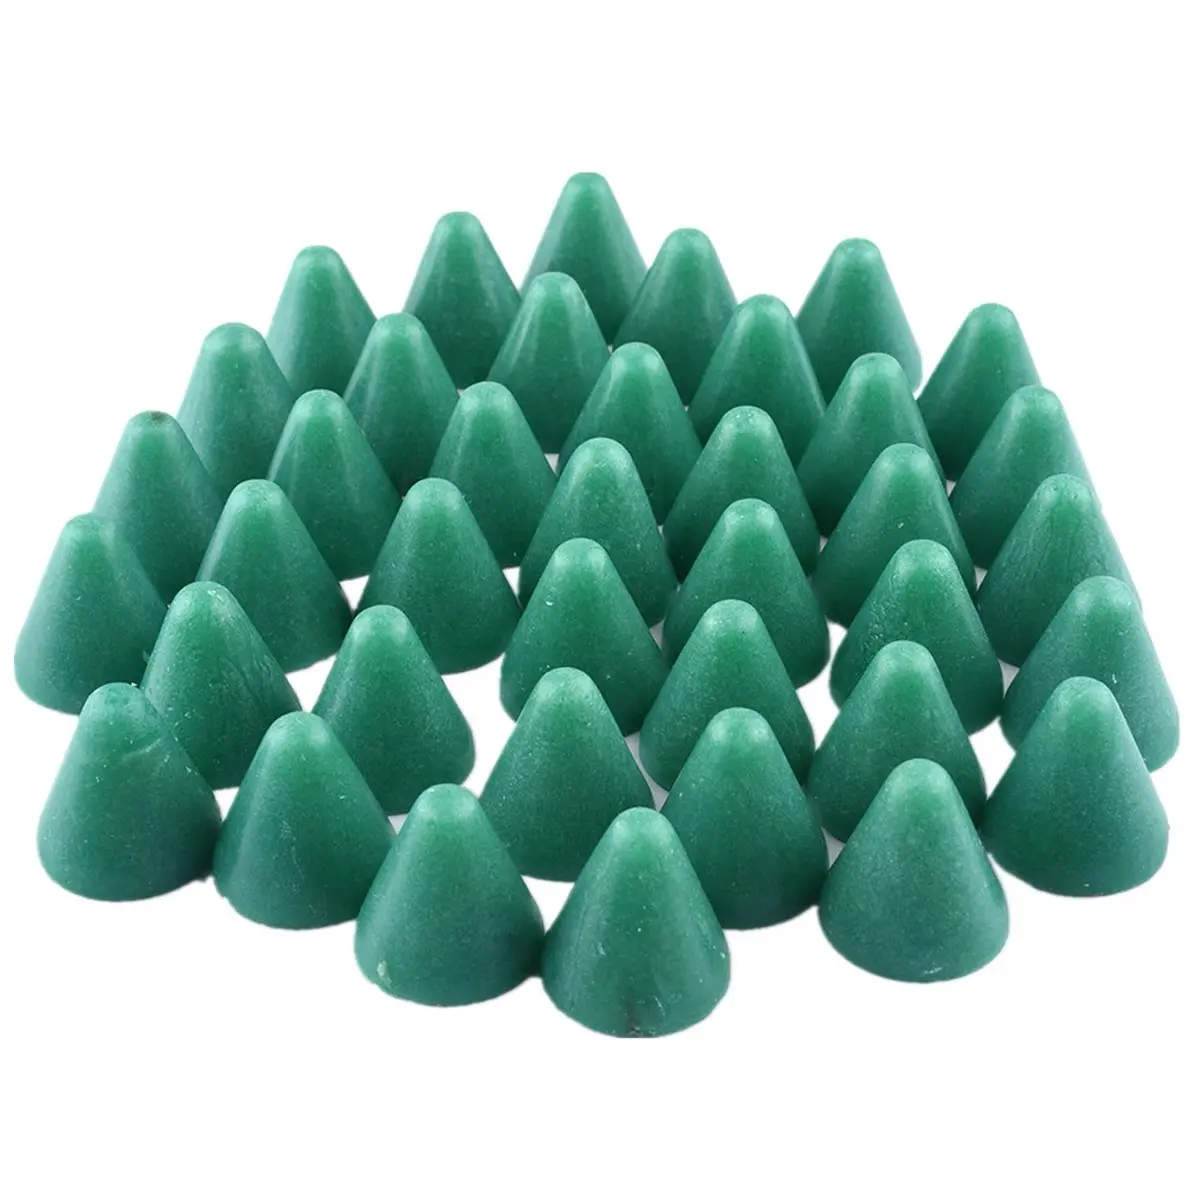 surface smooth Resin abrasive multi-style deburr polished conical triangle